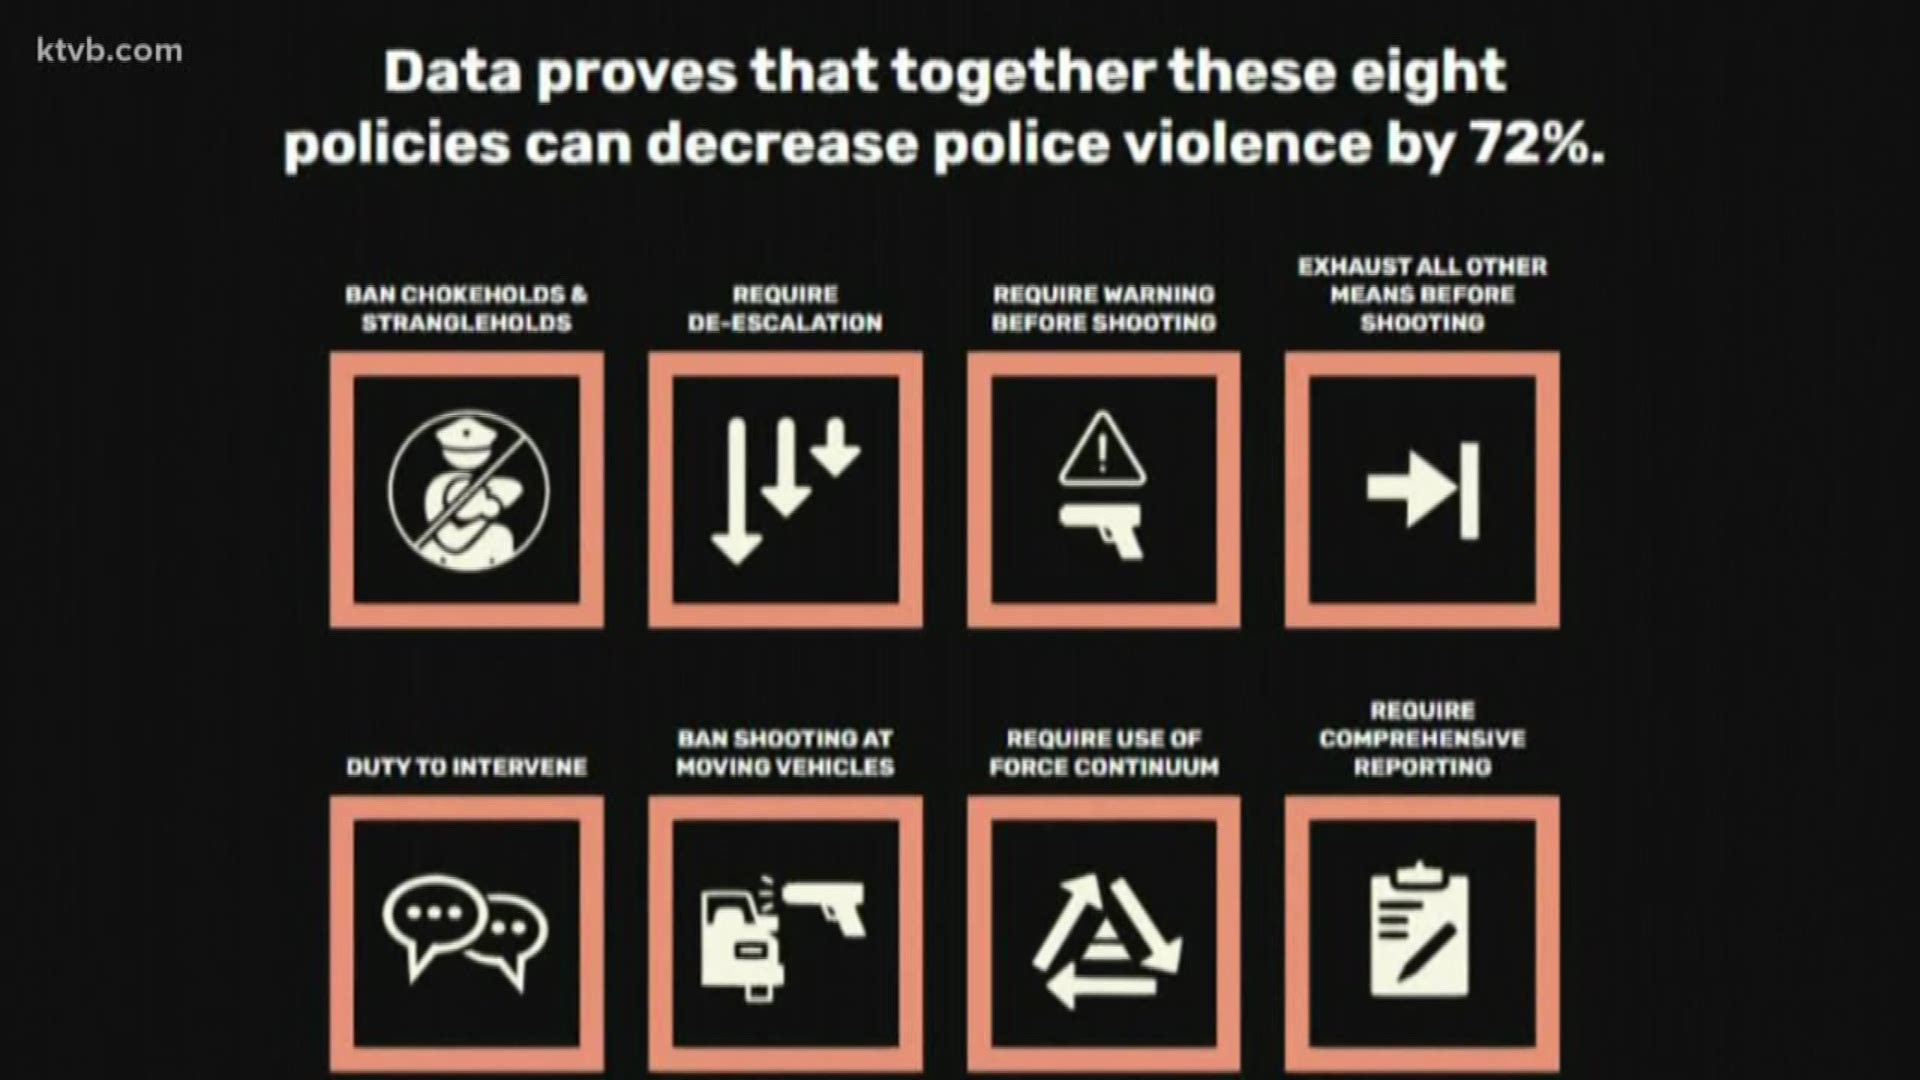 It calls on police agencies across the country to implement eight polices they say will reduce police violence.